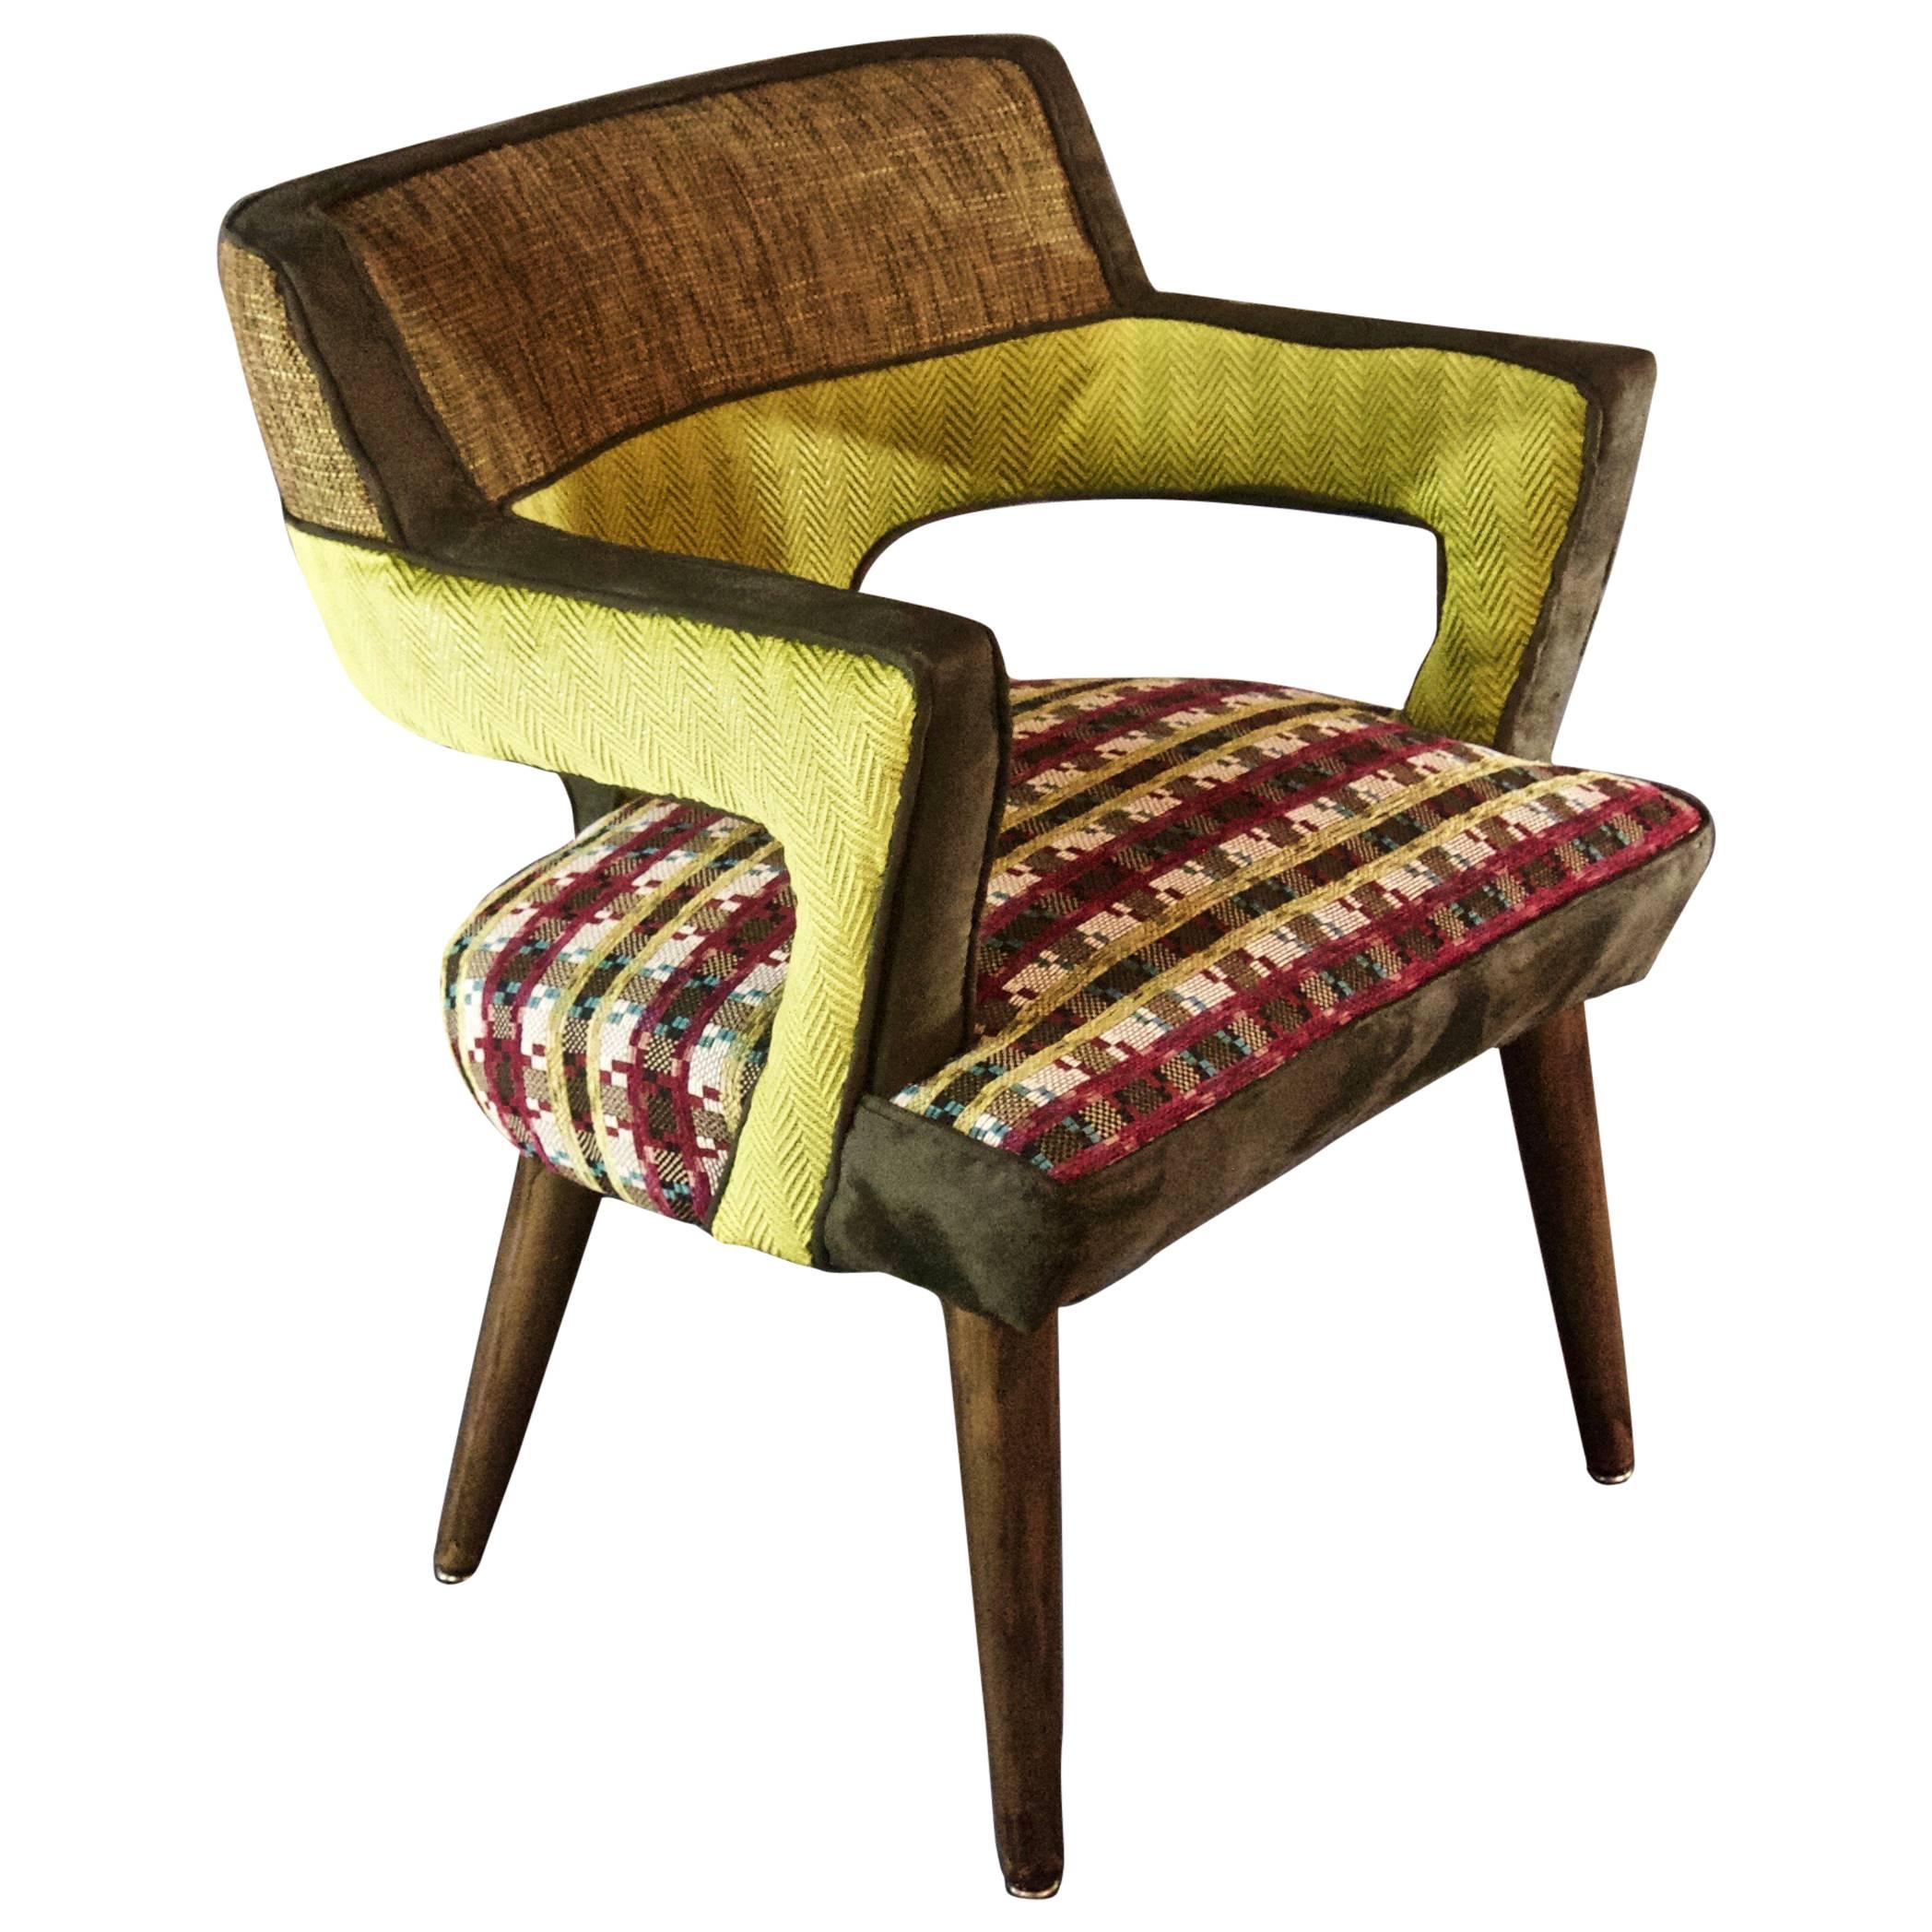 1960's Arm Chair in Tweed with Multi-Color Seat--in stock For Sale